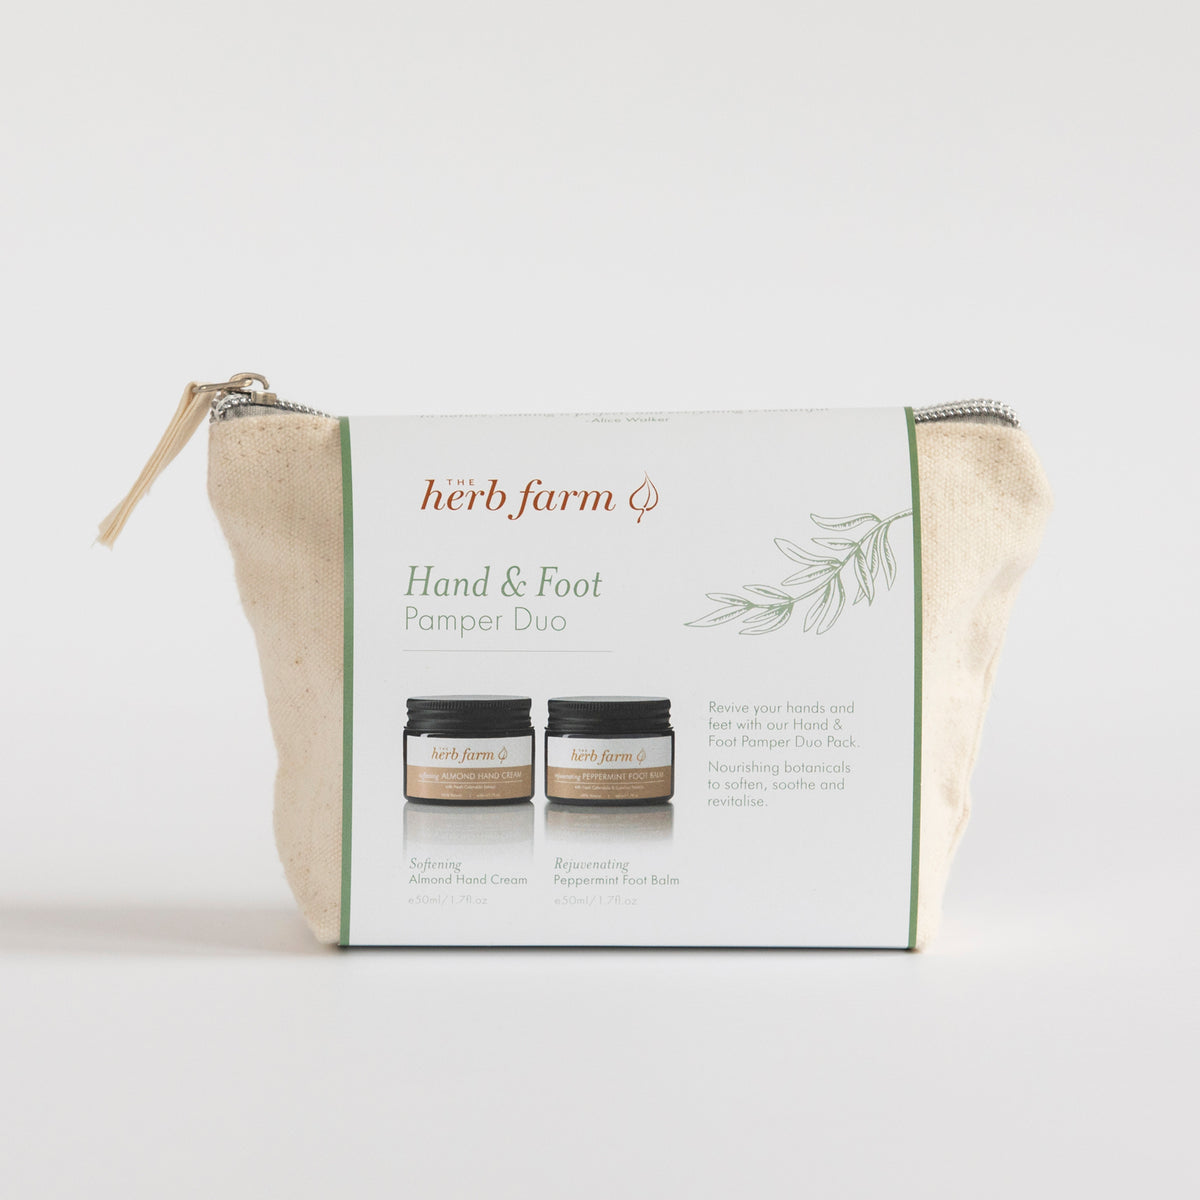 Hand & Foot Pamper Duo secondary